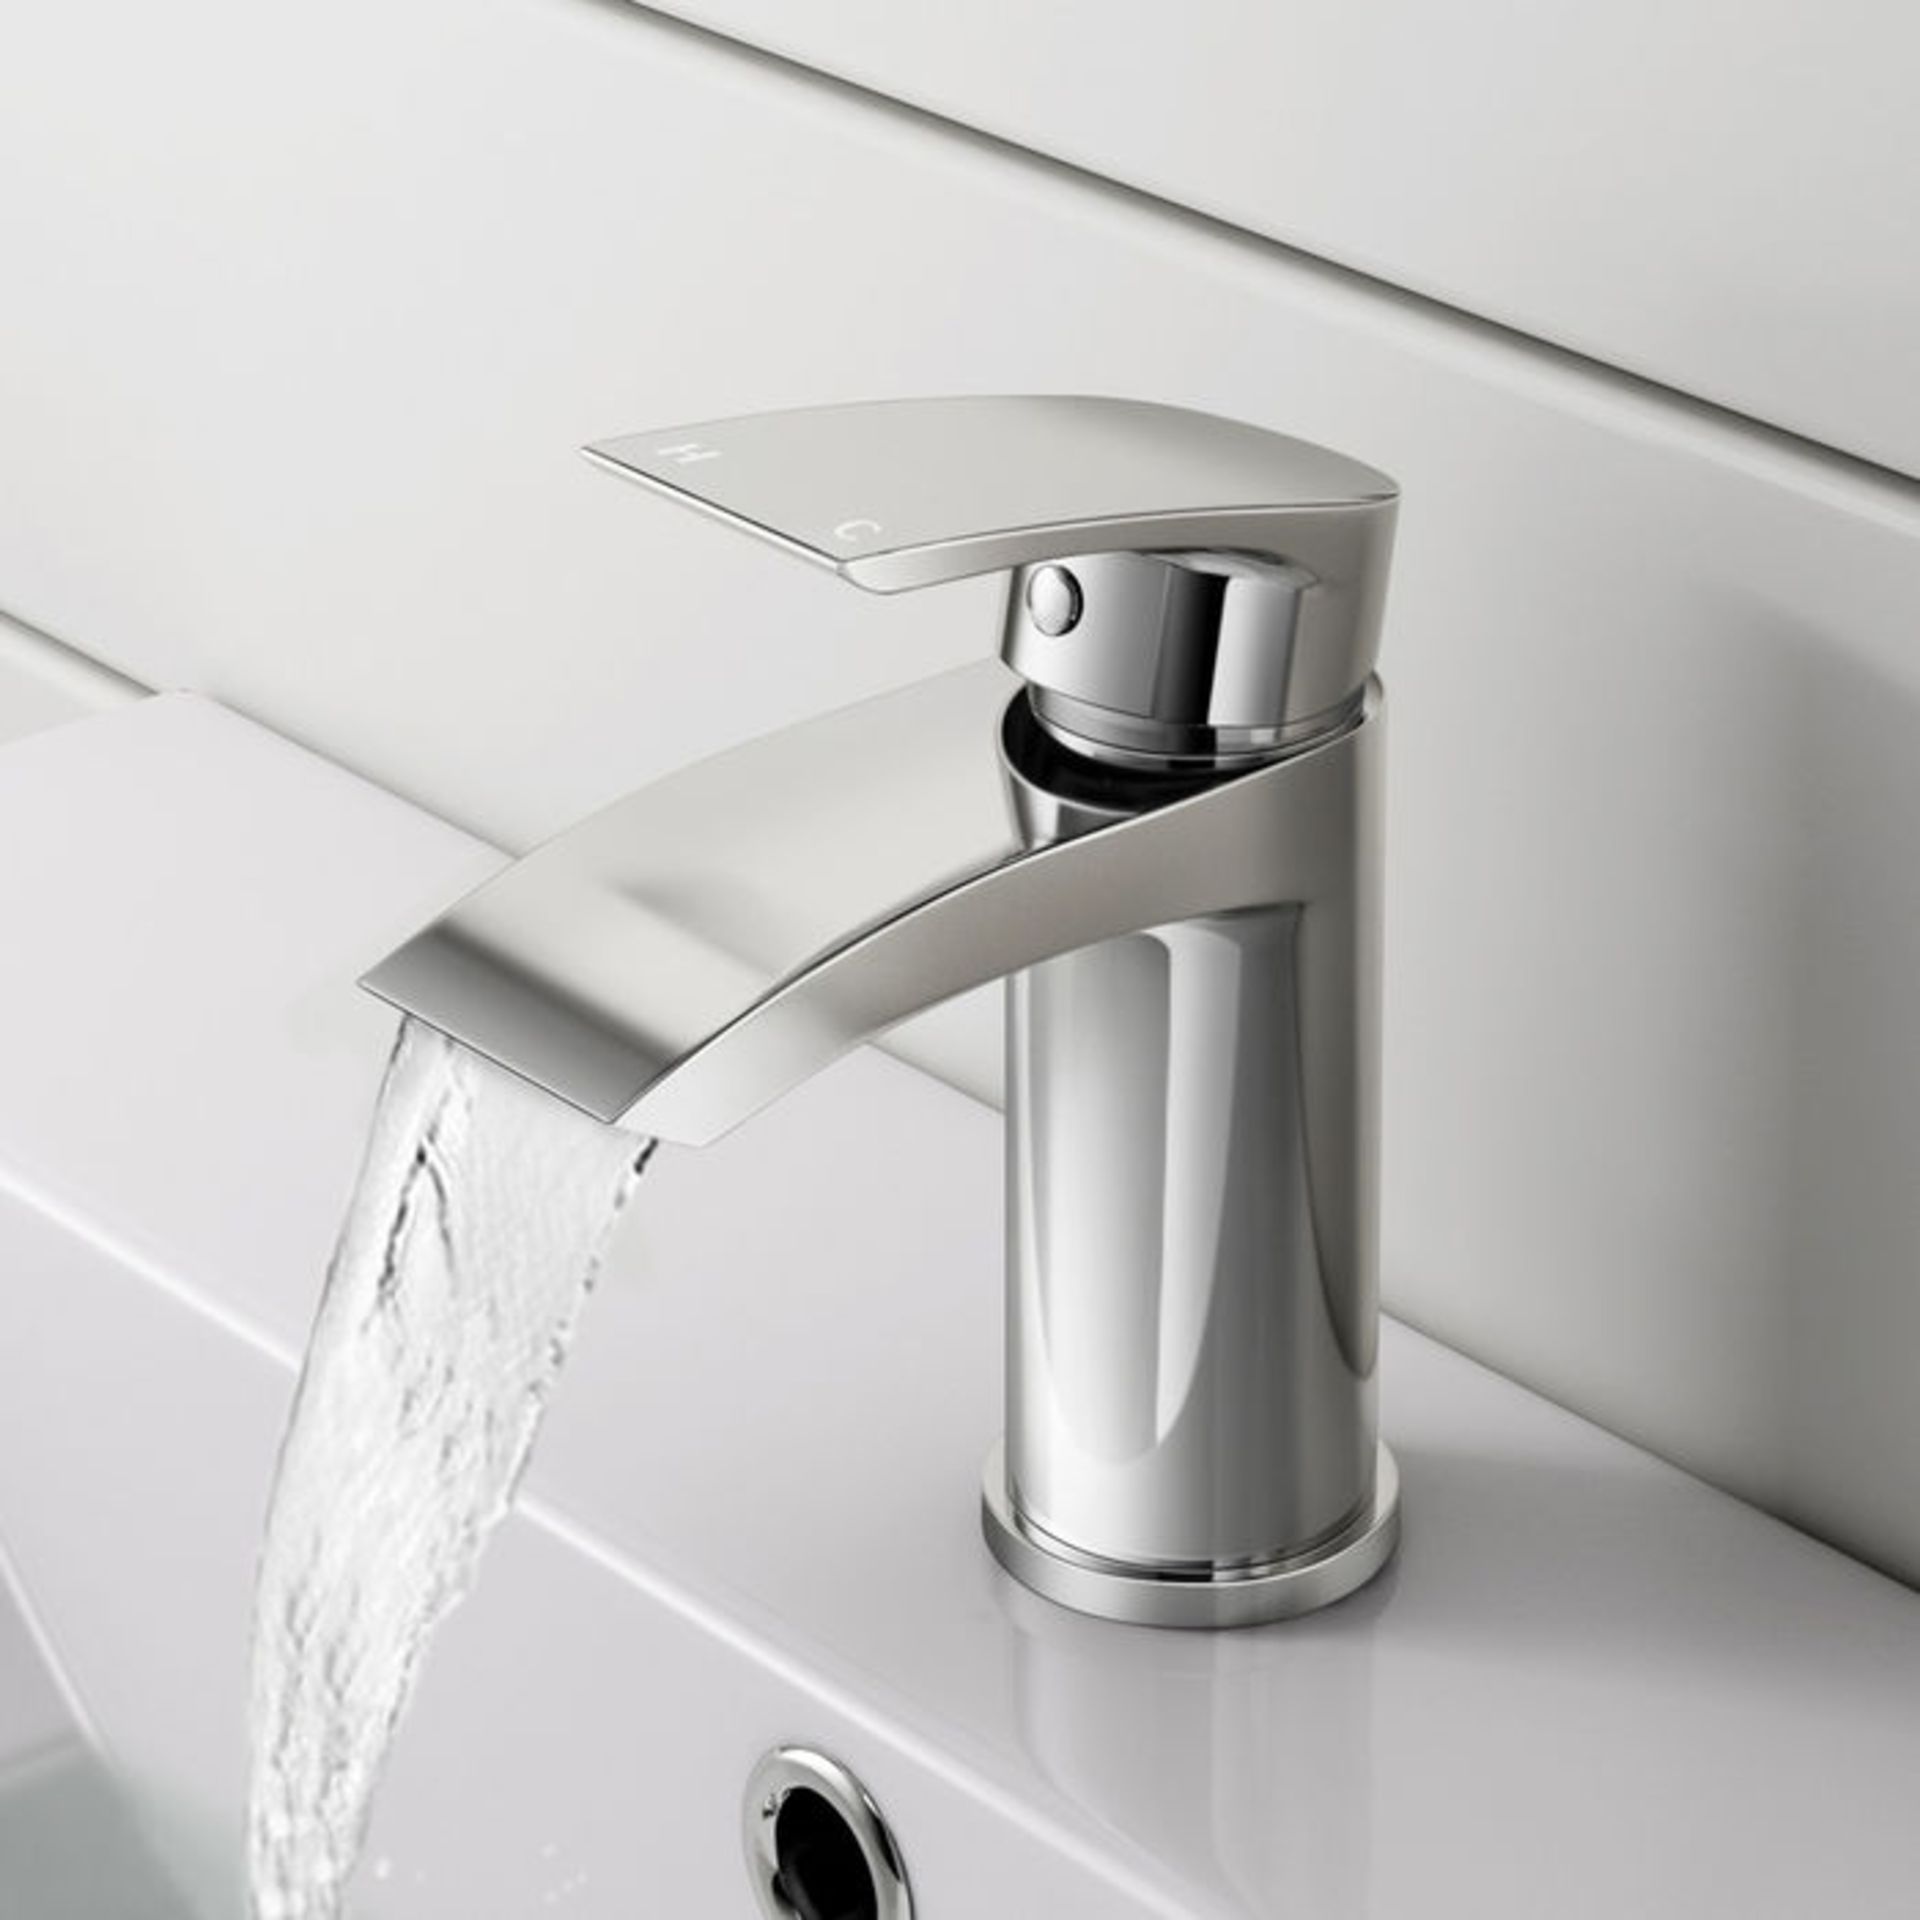 (AH37) Melbourne Basin Mixer Tap Crafted from chrome plated, corrosion free solid brass. Includes